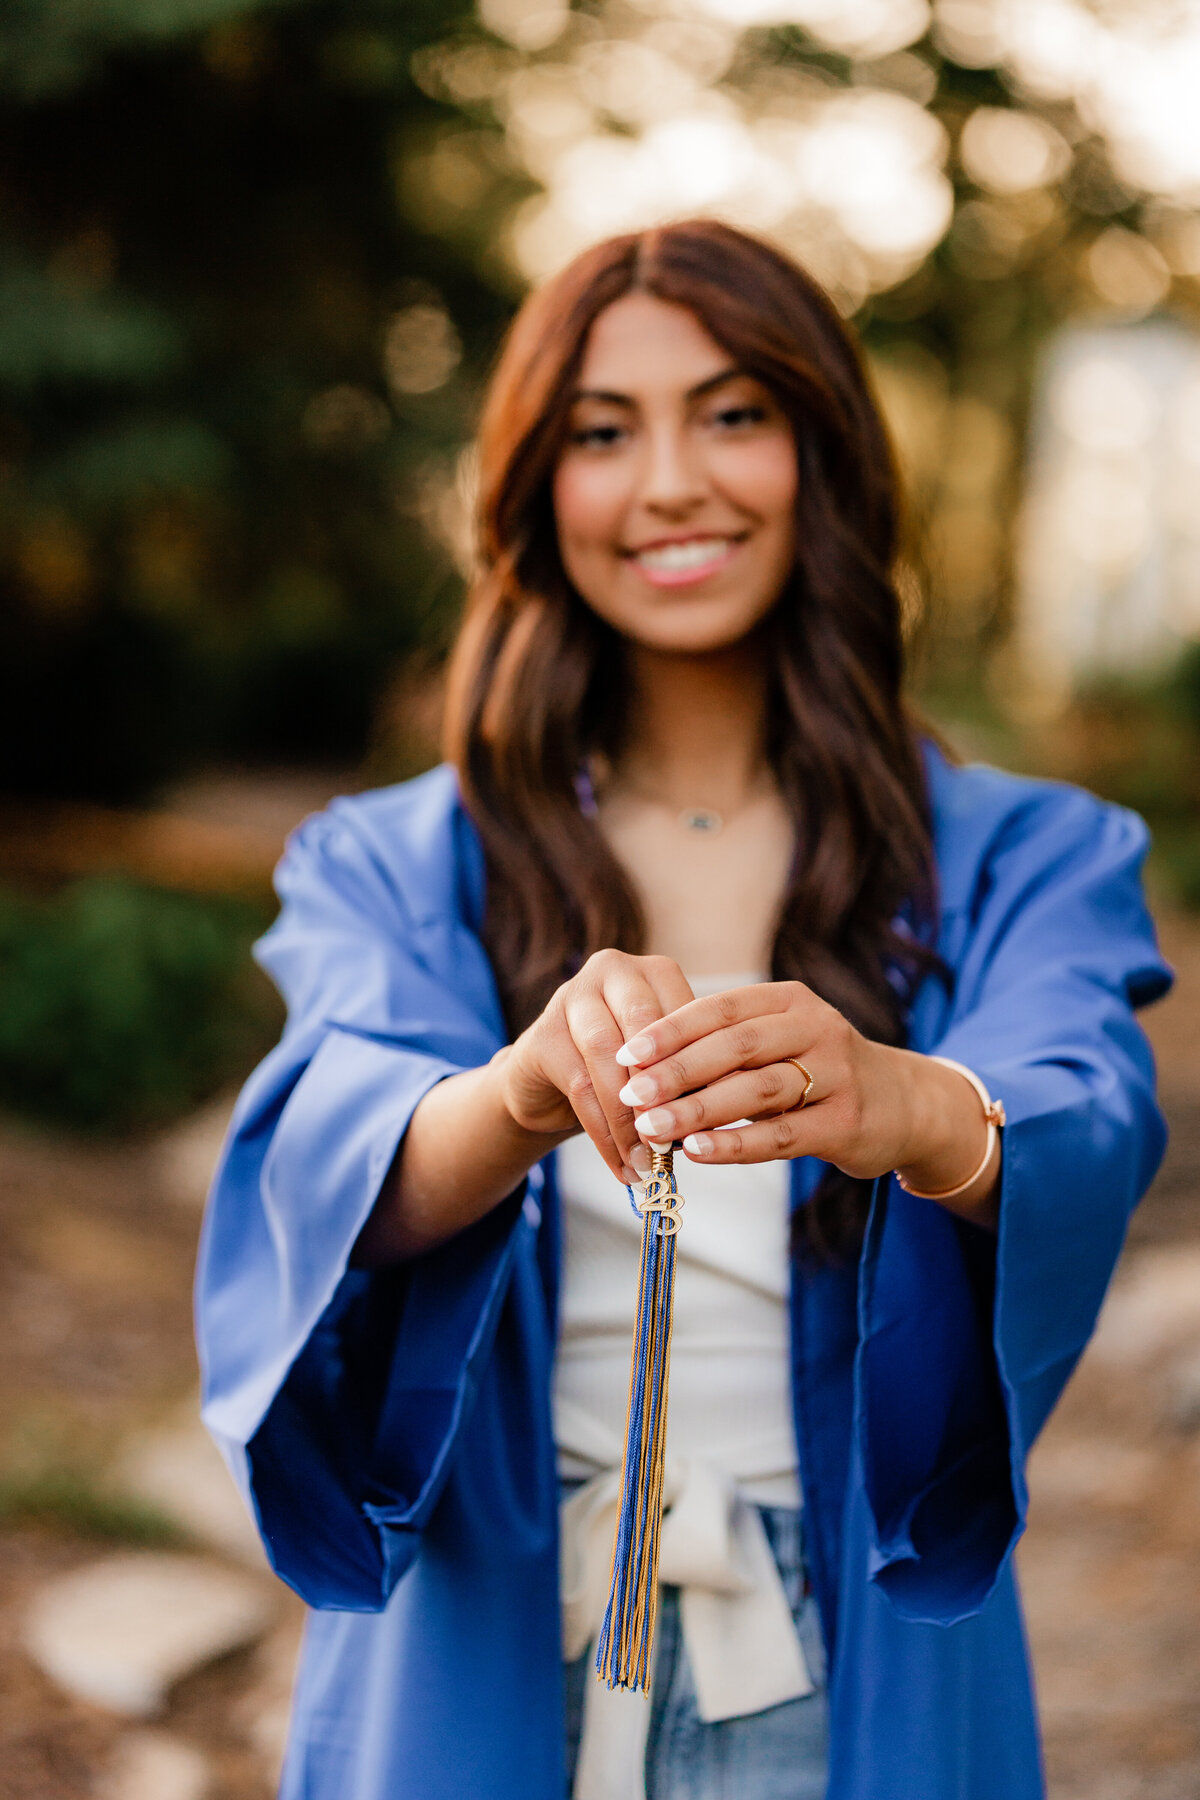 A teen girl poses in her graduation gown holding her tassle at Dellwood Park.